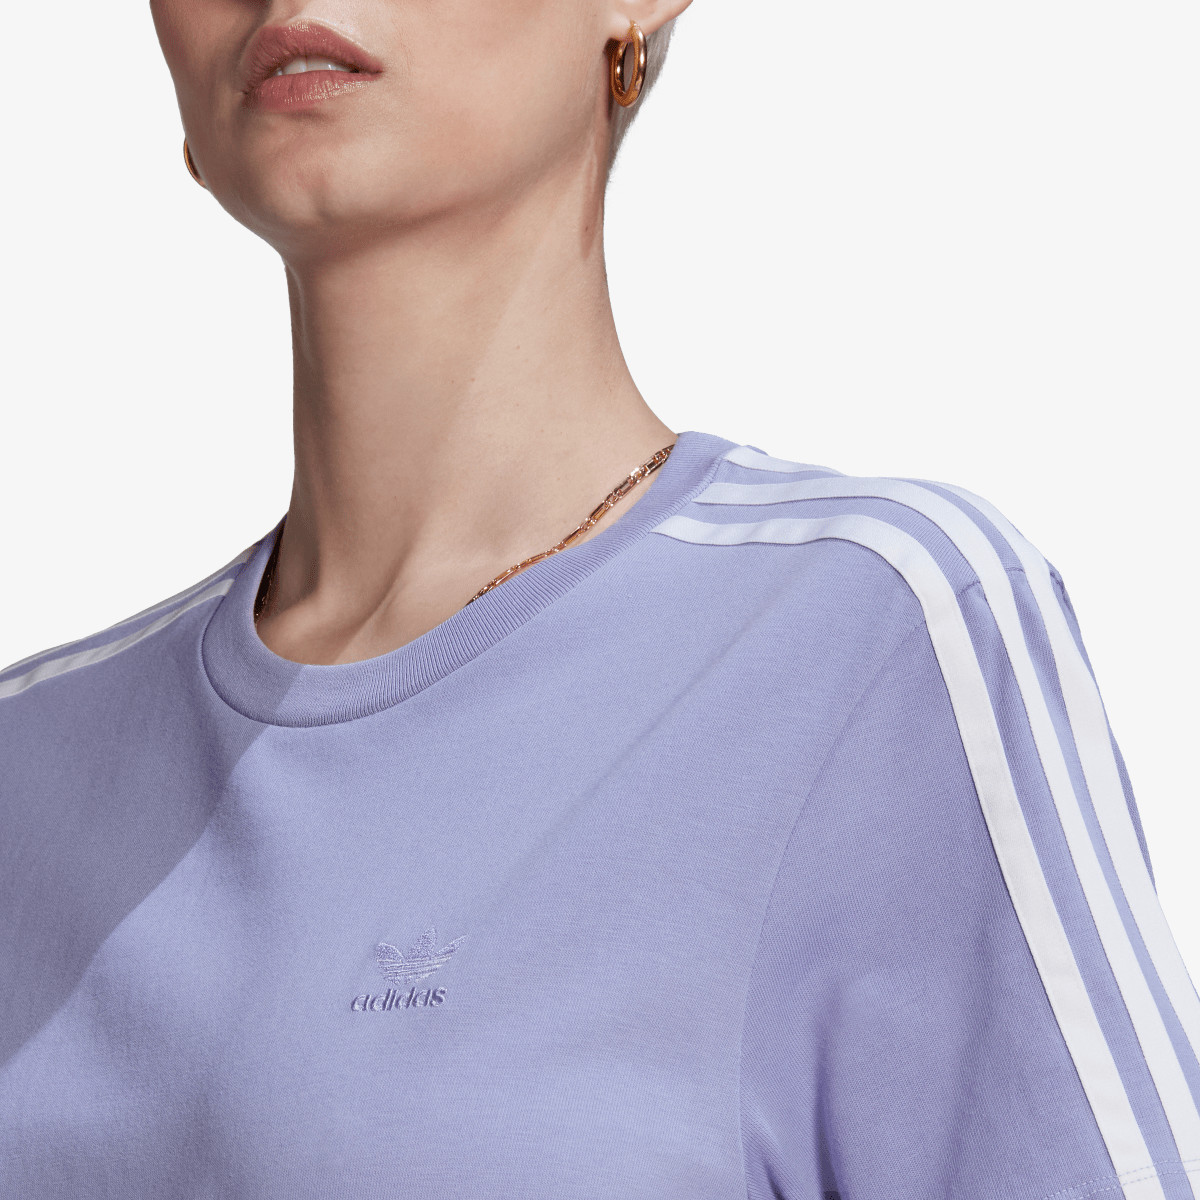 ADIDAS ROCHII TEE DRESS WITH KNOT DETAIL 